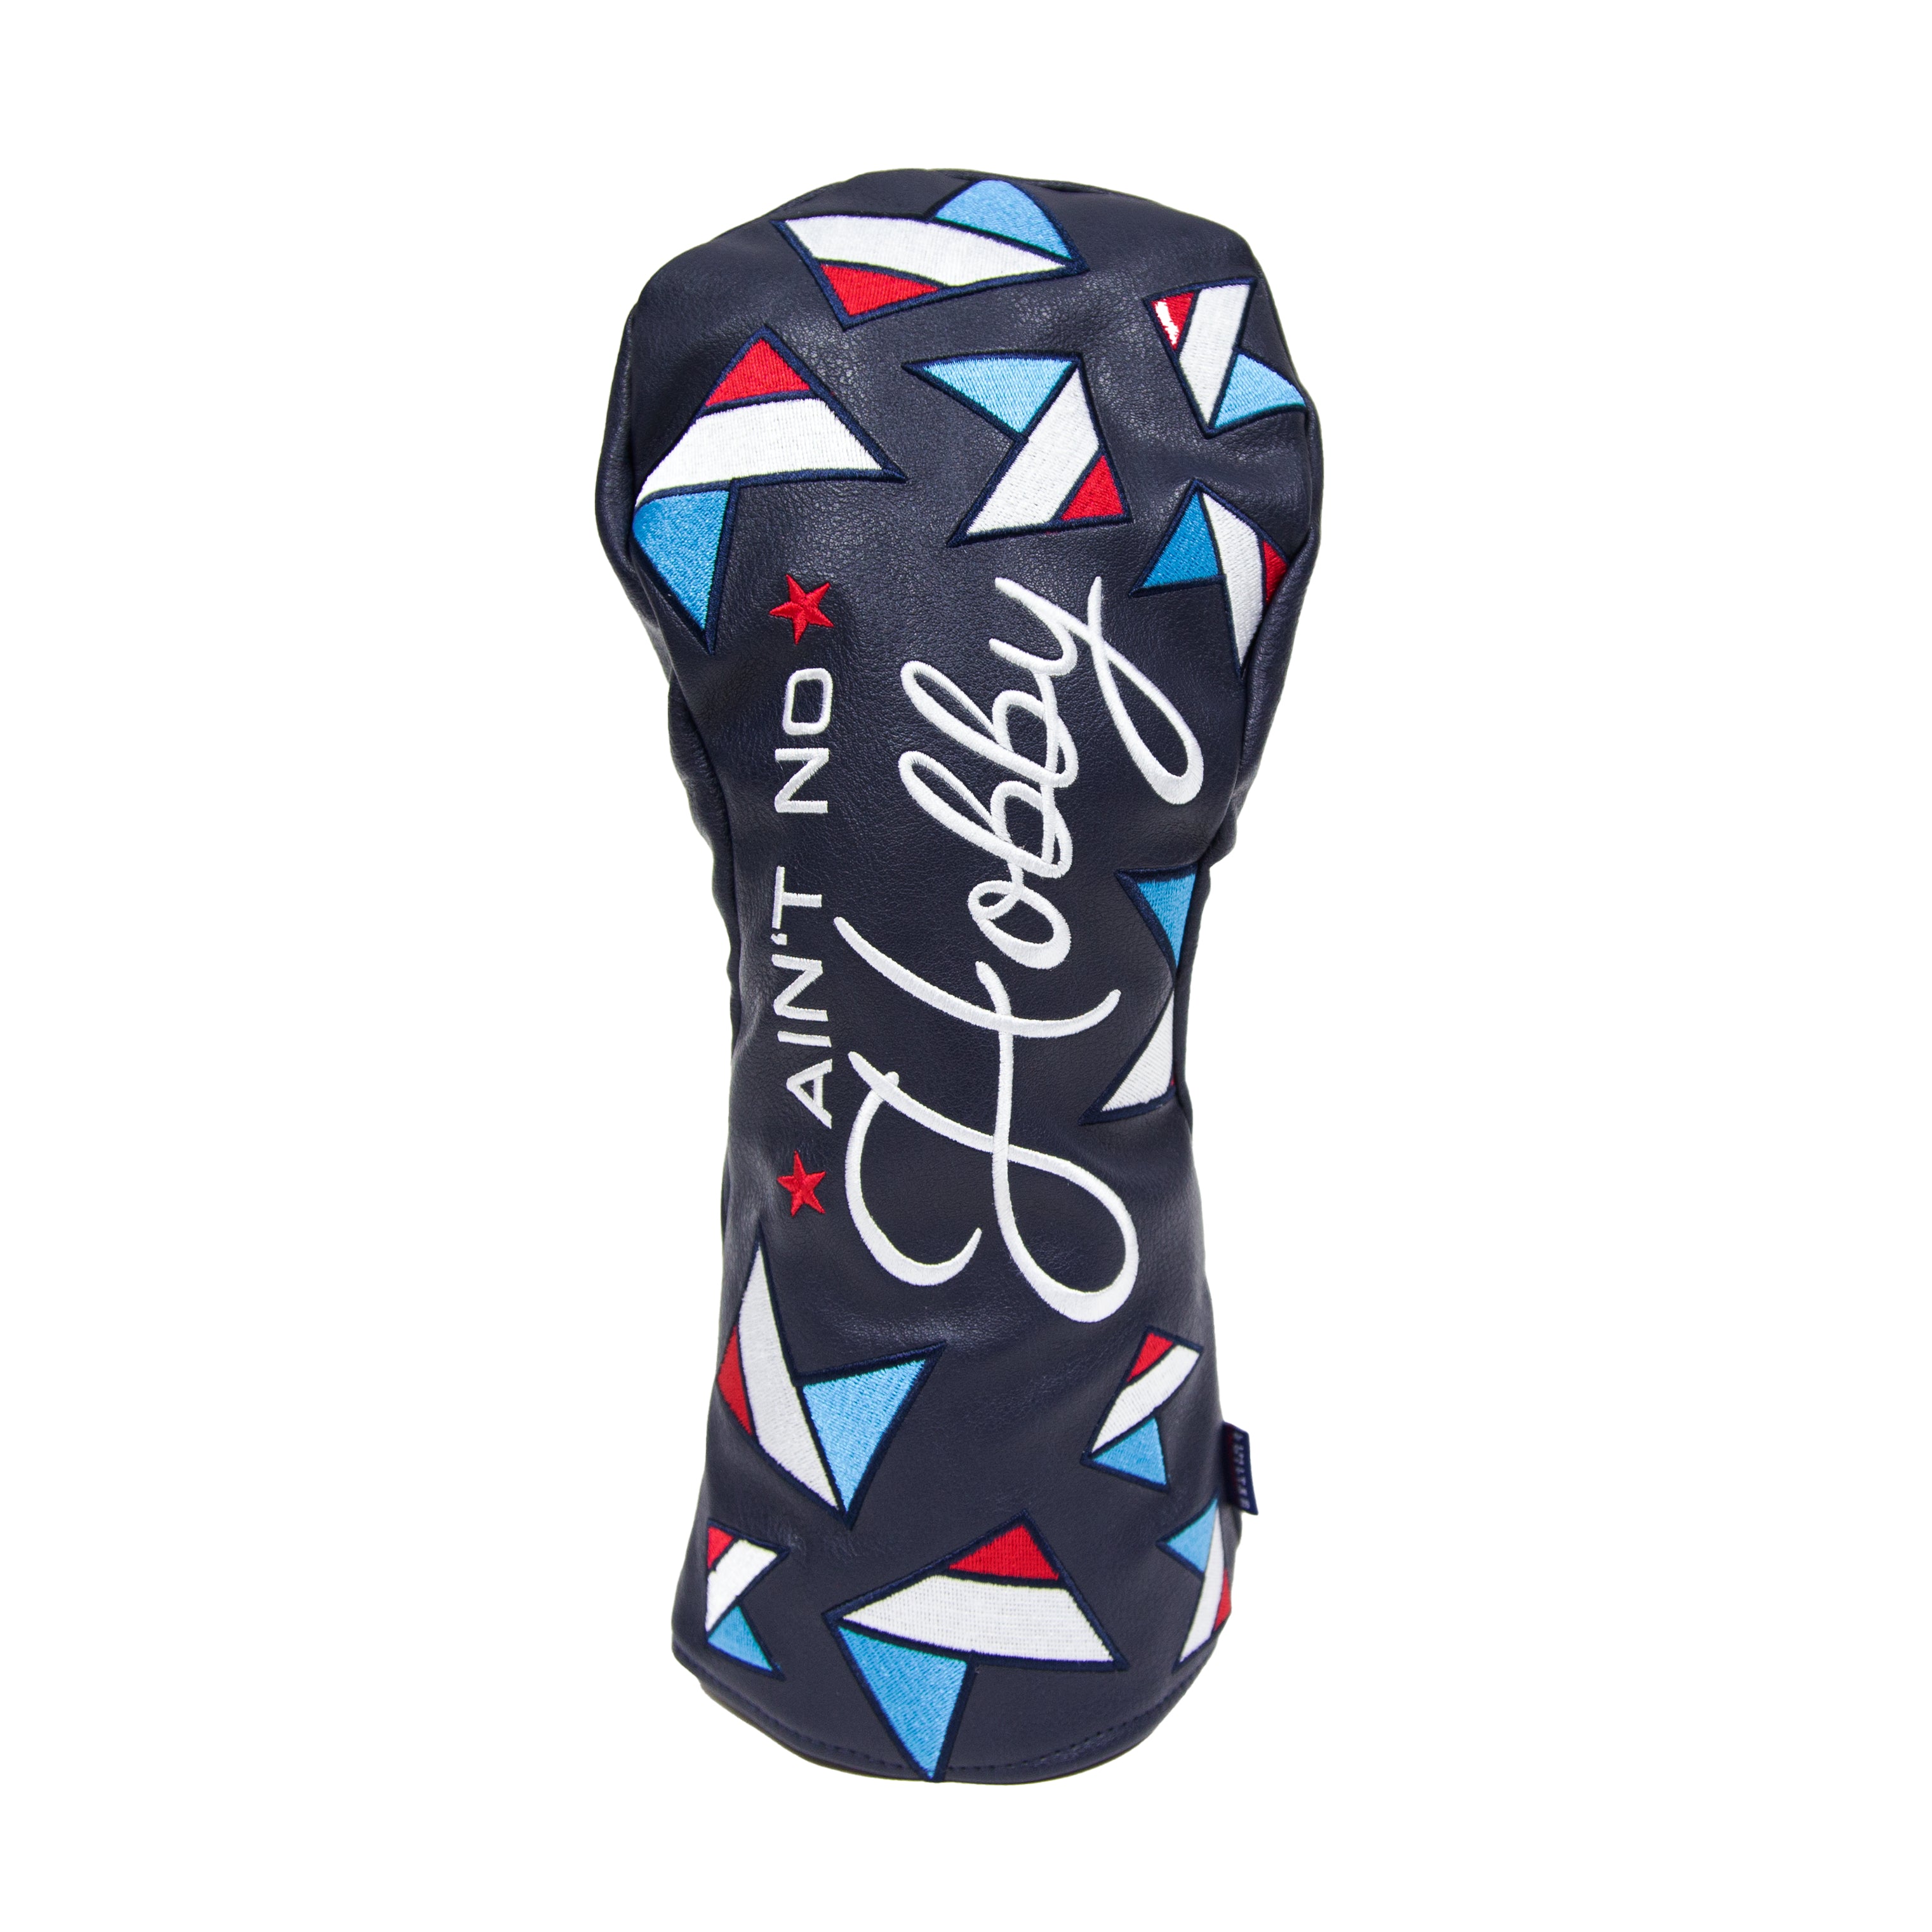 Barstool Golf Ain't No Hobby Driver Headcover-Golf Accessories-Fore Play-Navy-One Size-Barstool Sports